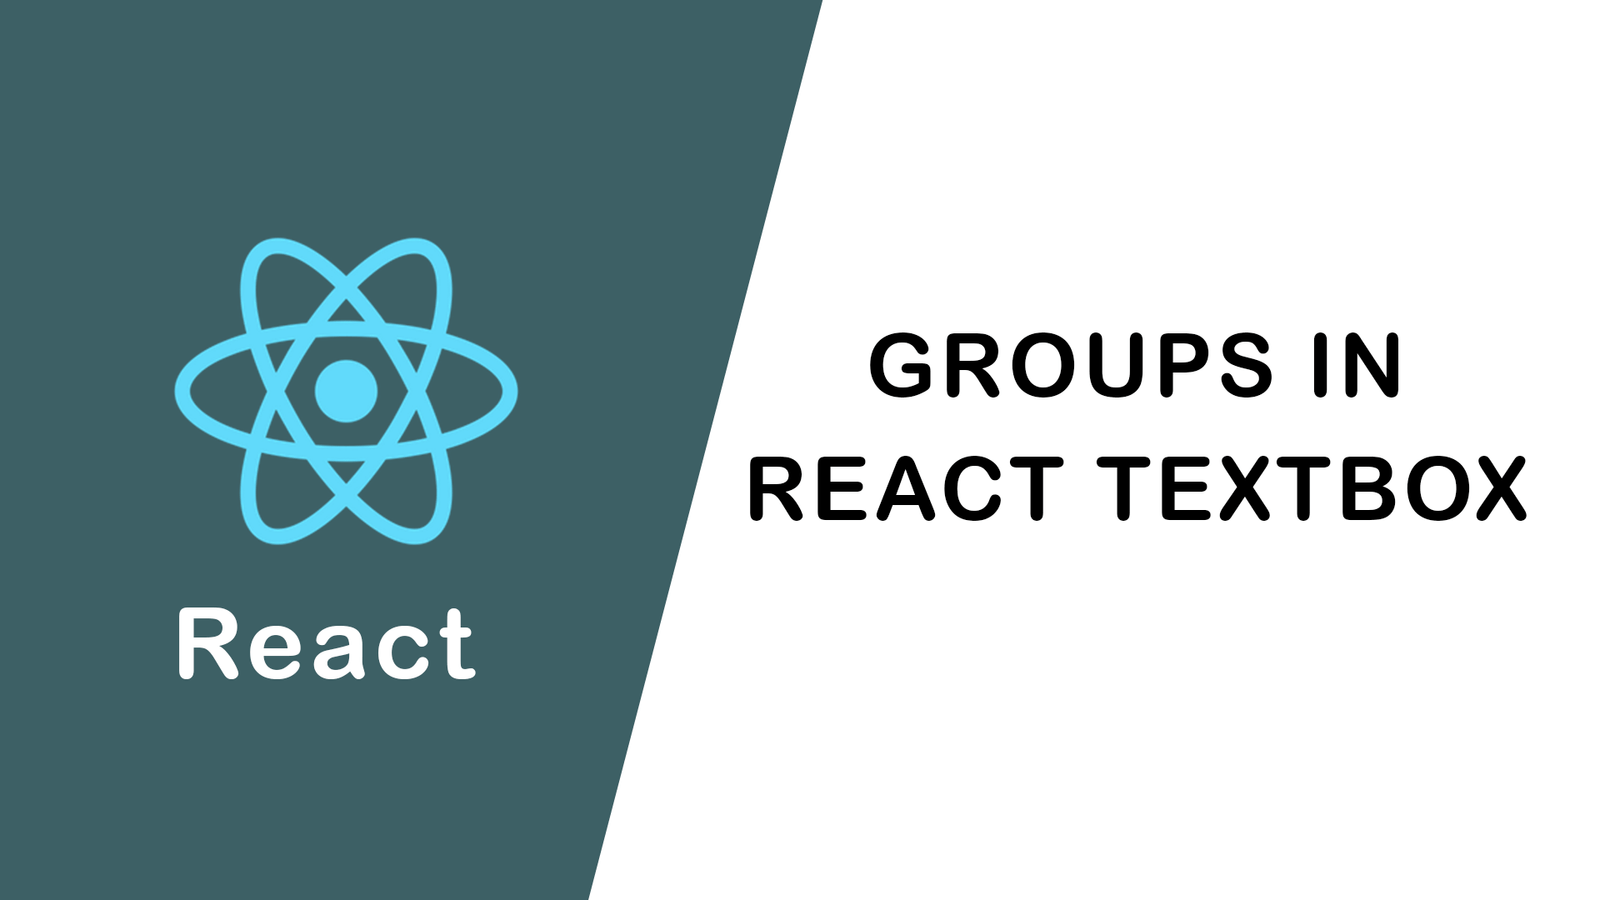 Groups in React Textbox